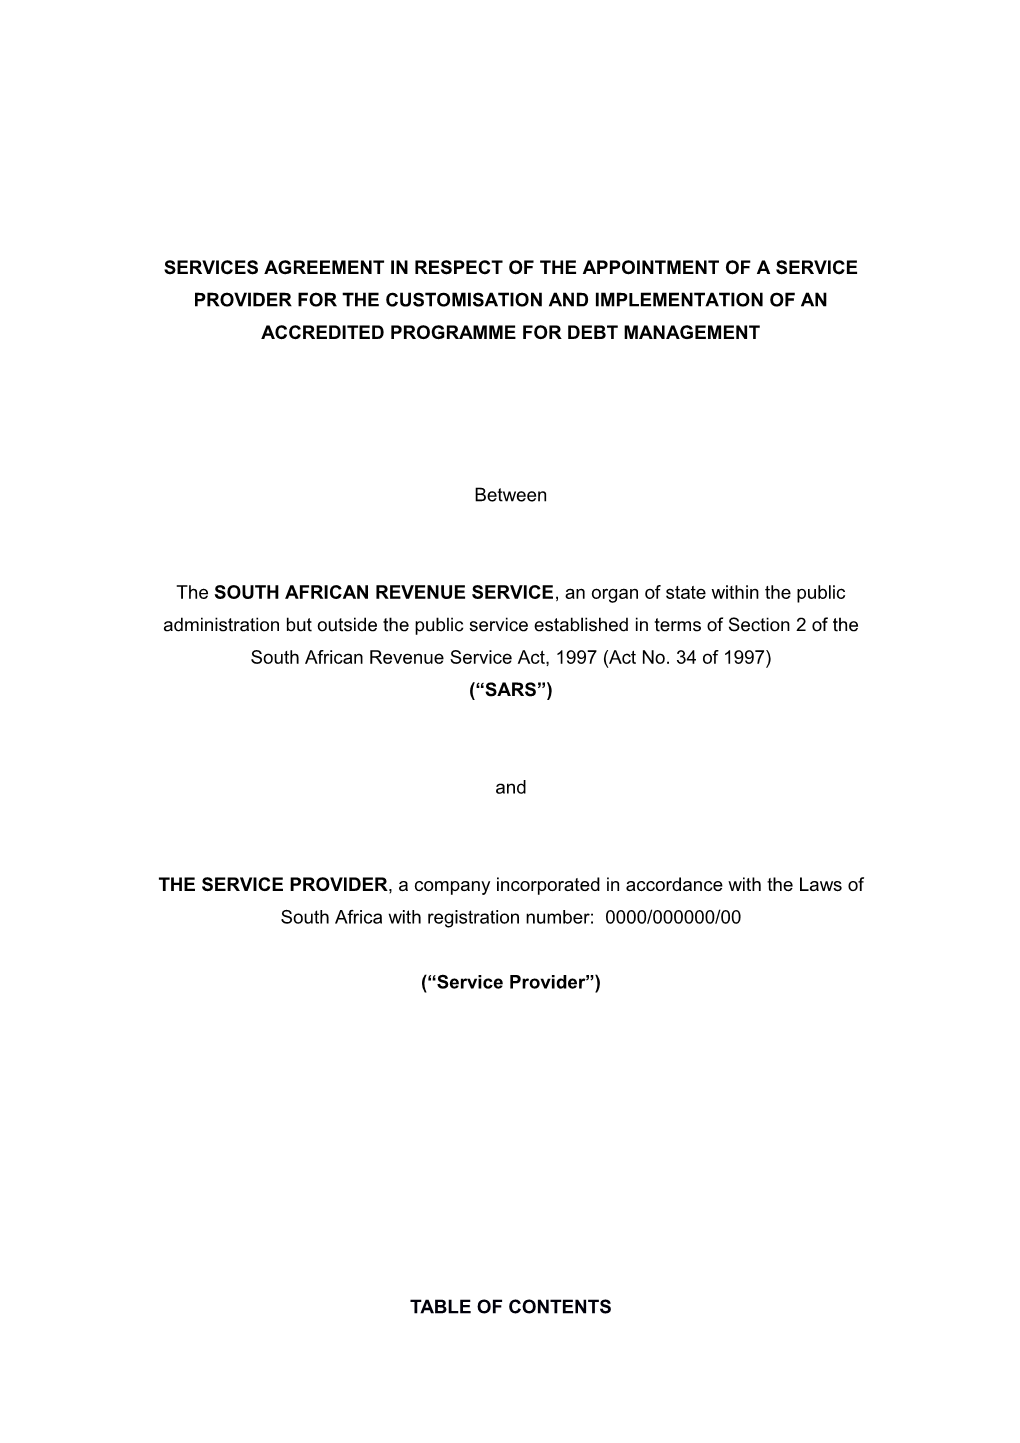 Services Agreement in Respect of the Appointment of a Service Provider for the Customisation